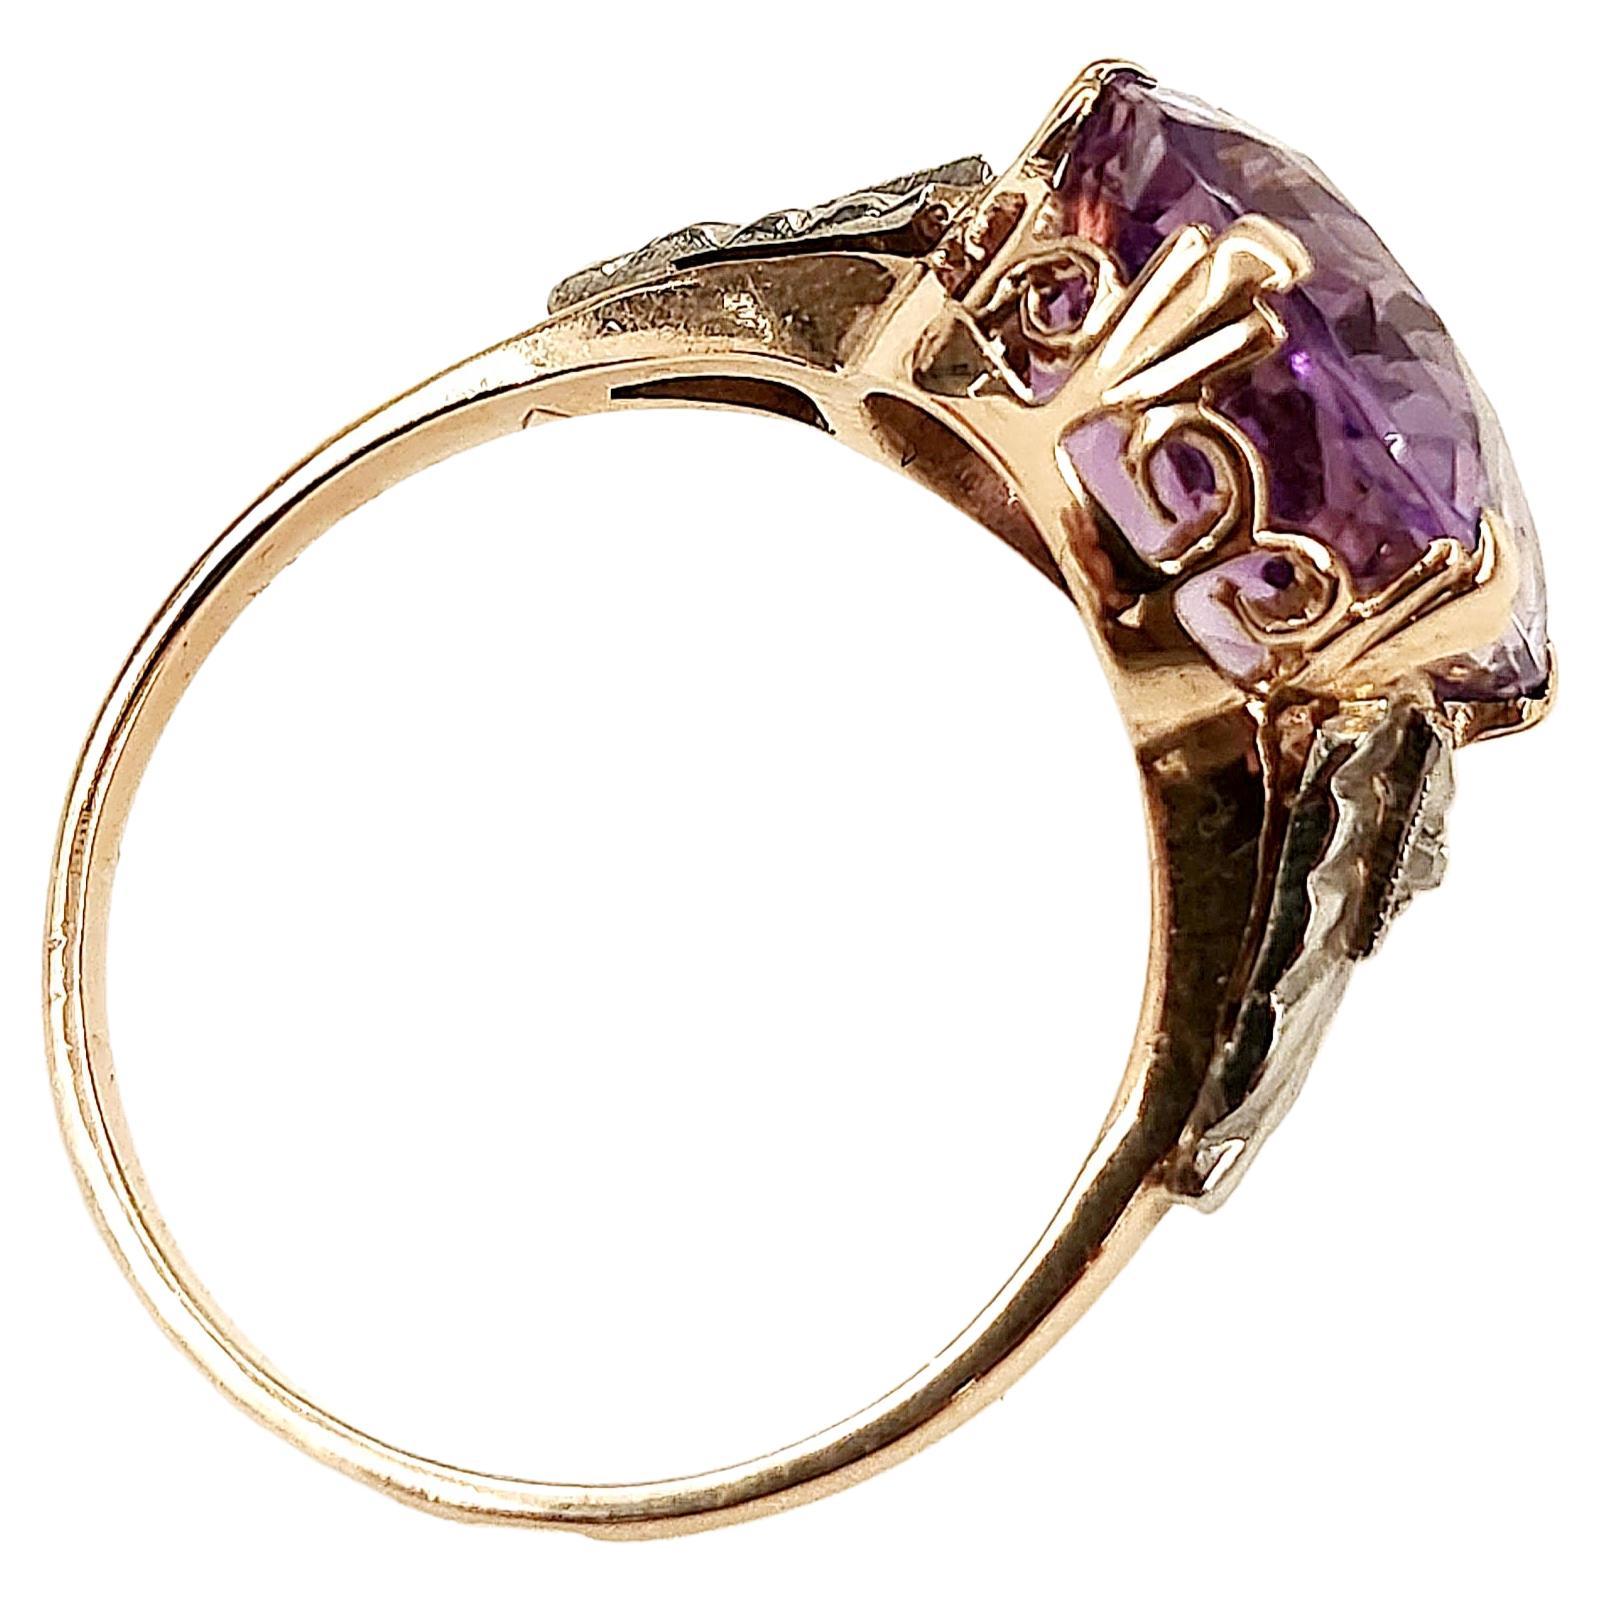 Vintage 14k gold solitare ring centered with natural large siberian amethyst in oval cut with a diamrter of 14.80mm×12.17mm with detailed work on ring sides ring was made in moscow during soviet union 1940/1950.c hall marked 583 for 14k gold and